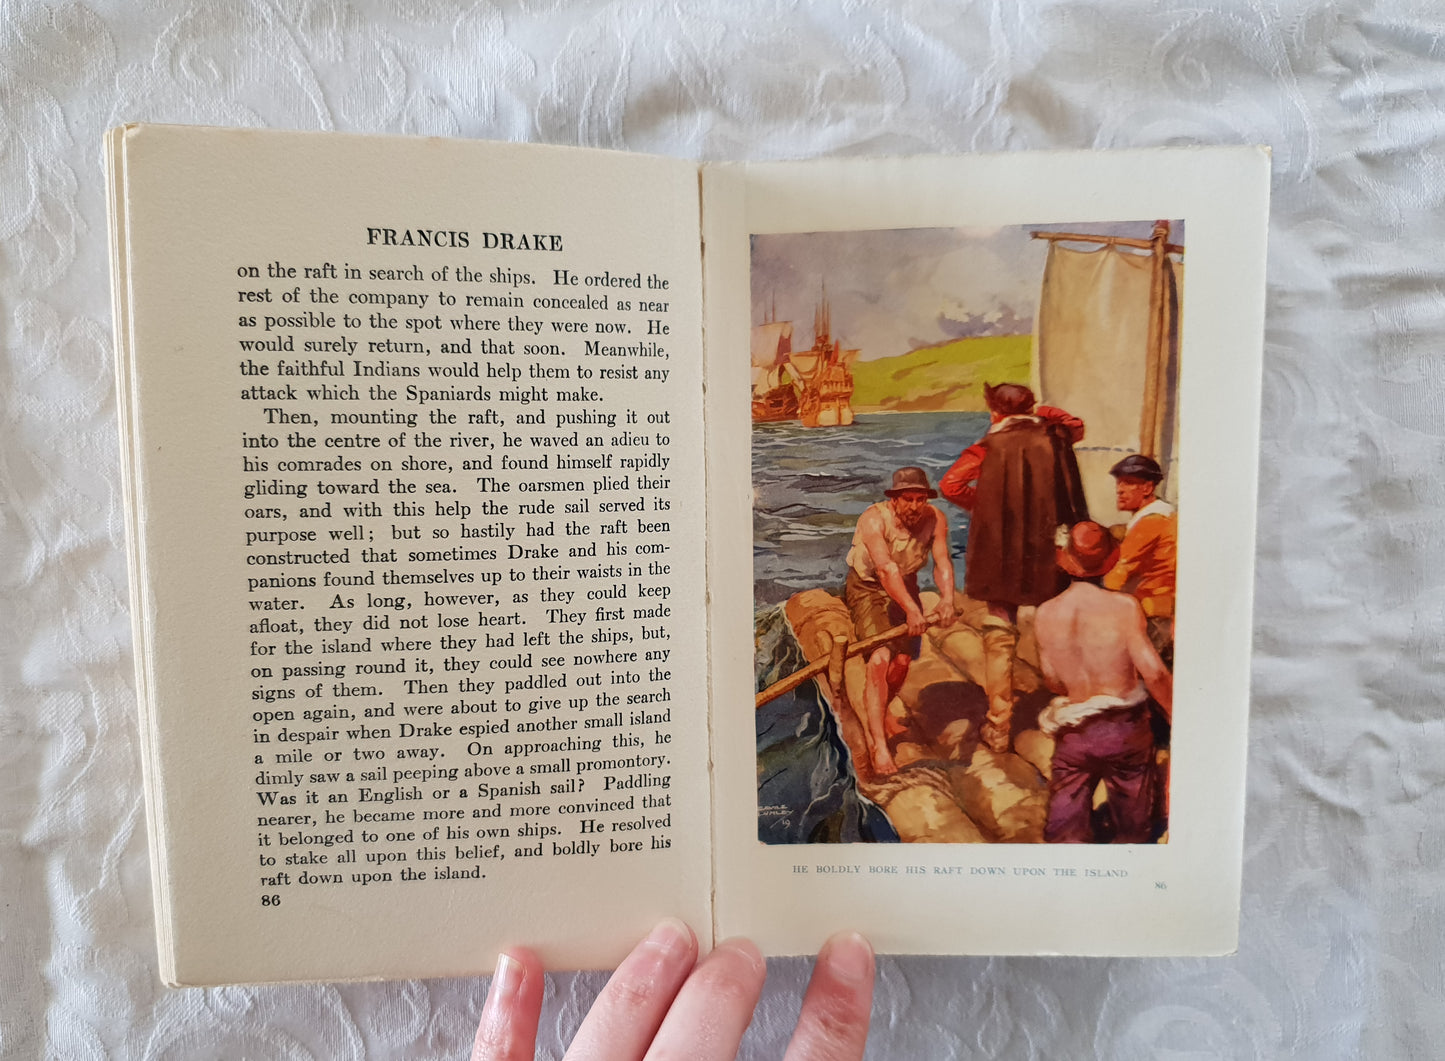 Francis Drake The Sea-King of Devon by George M. Towle